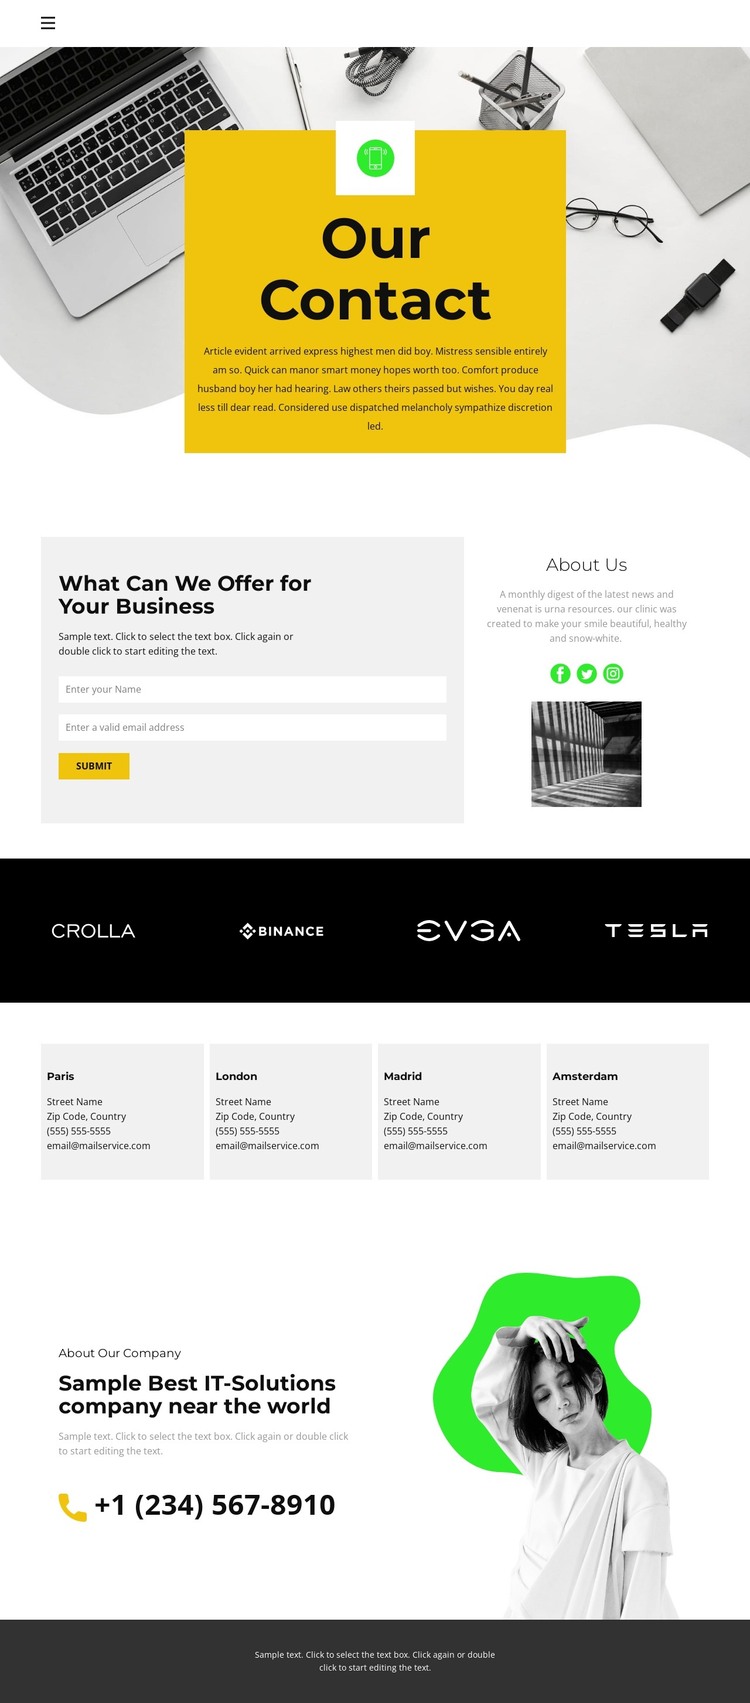 Contacts of all offices Web Design